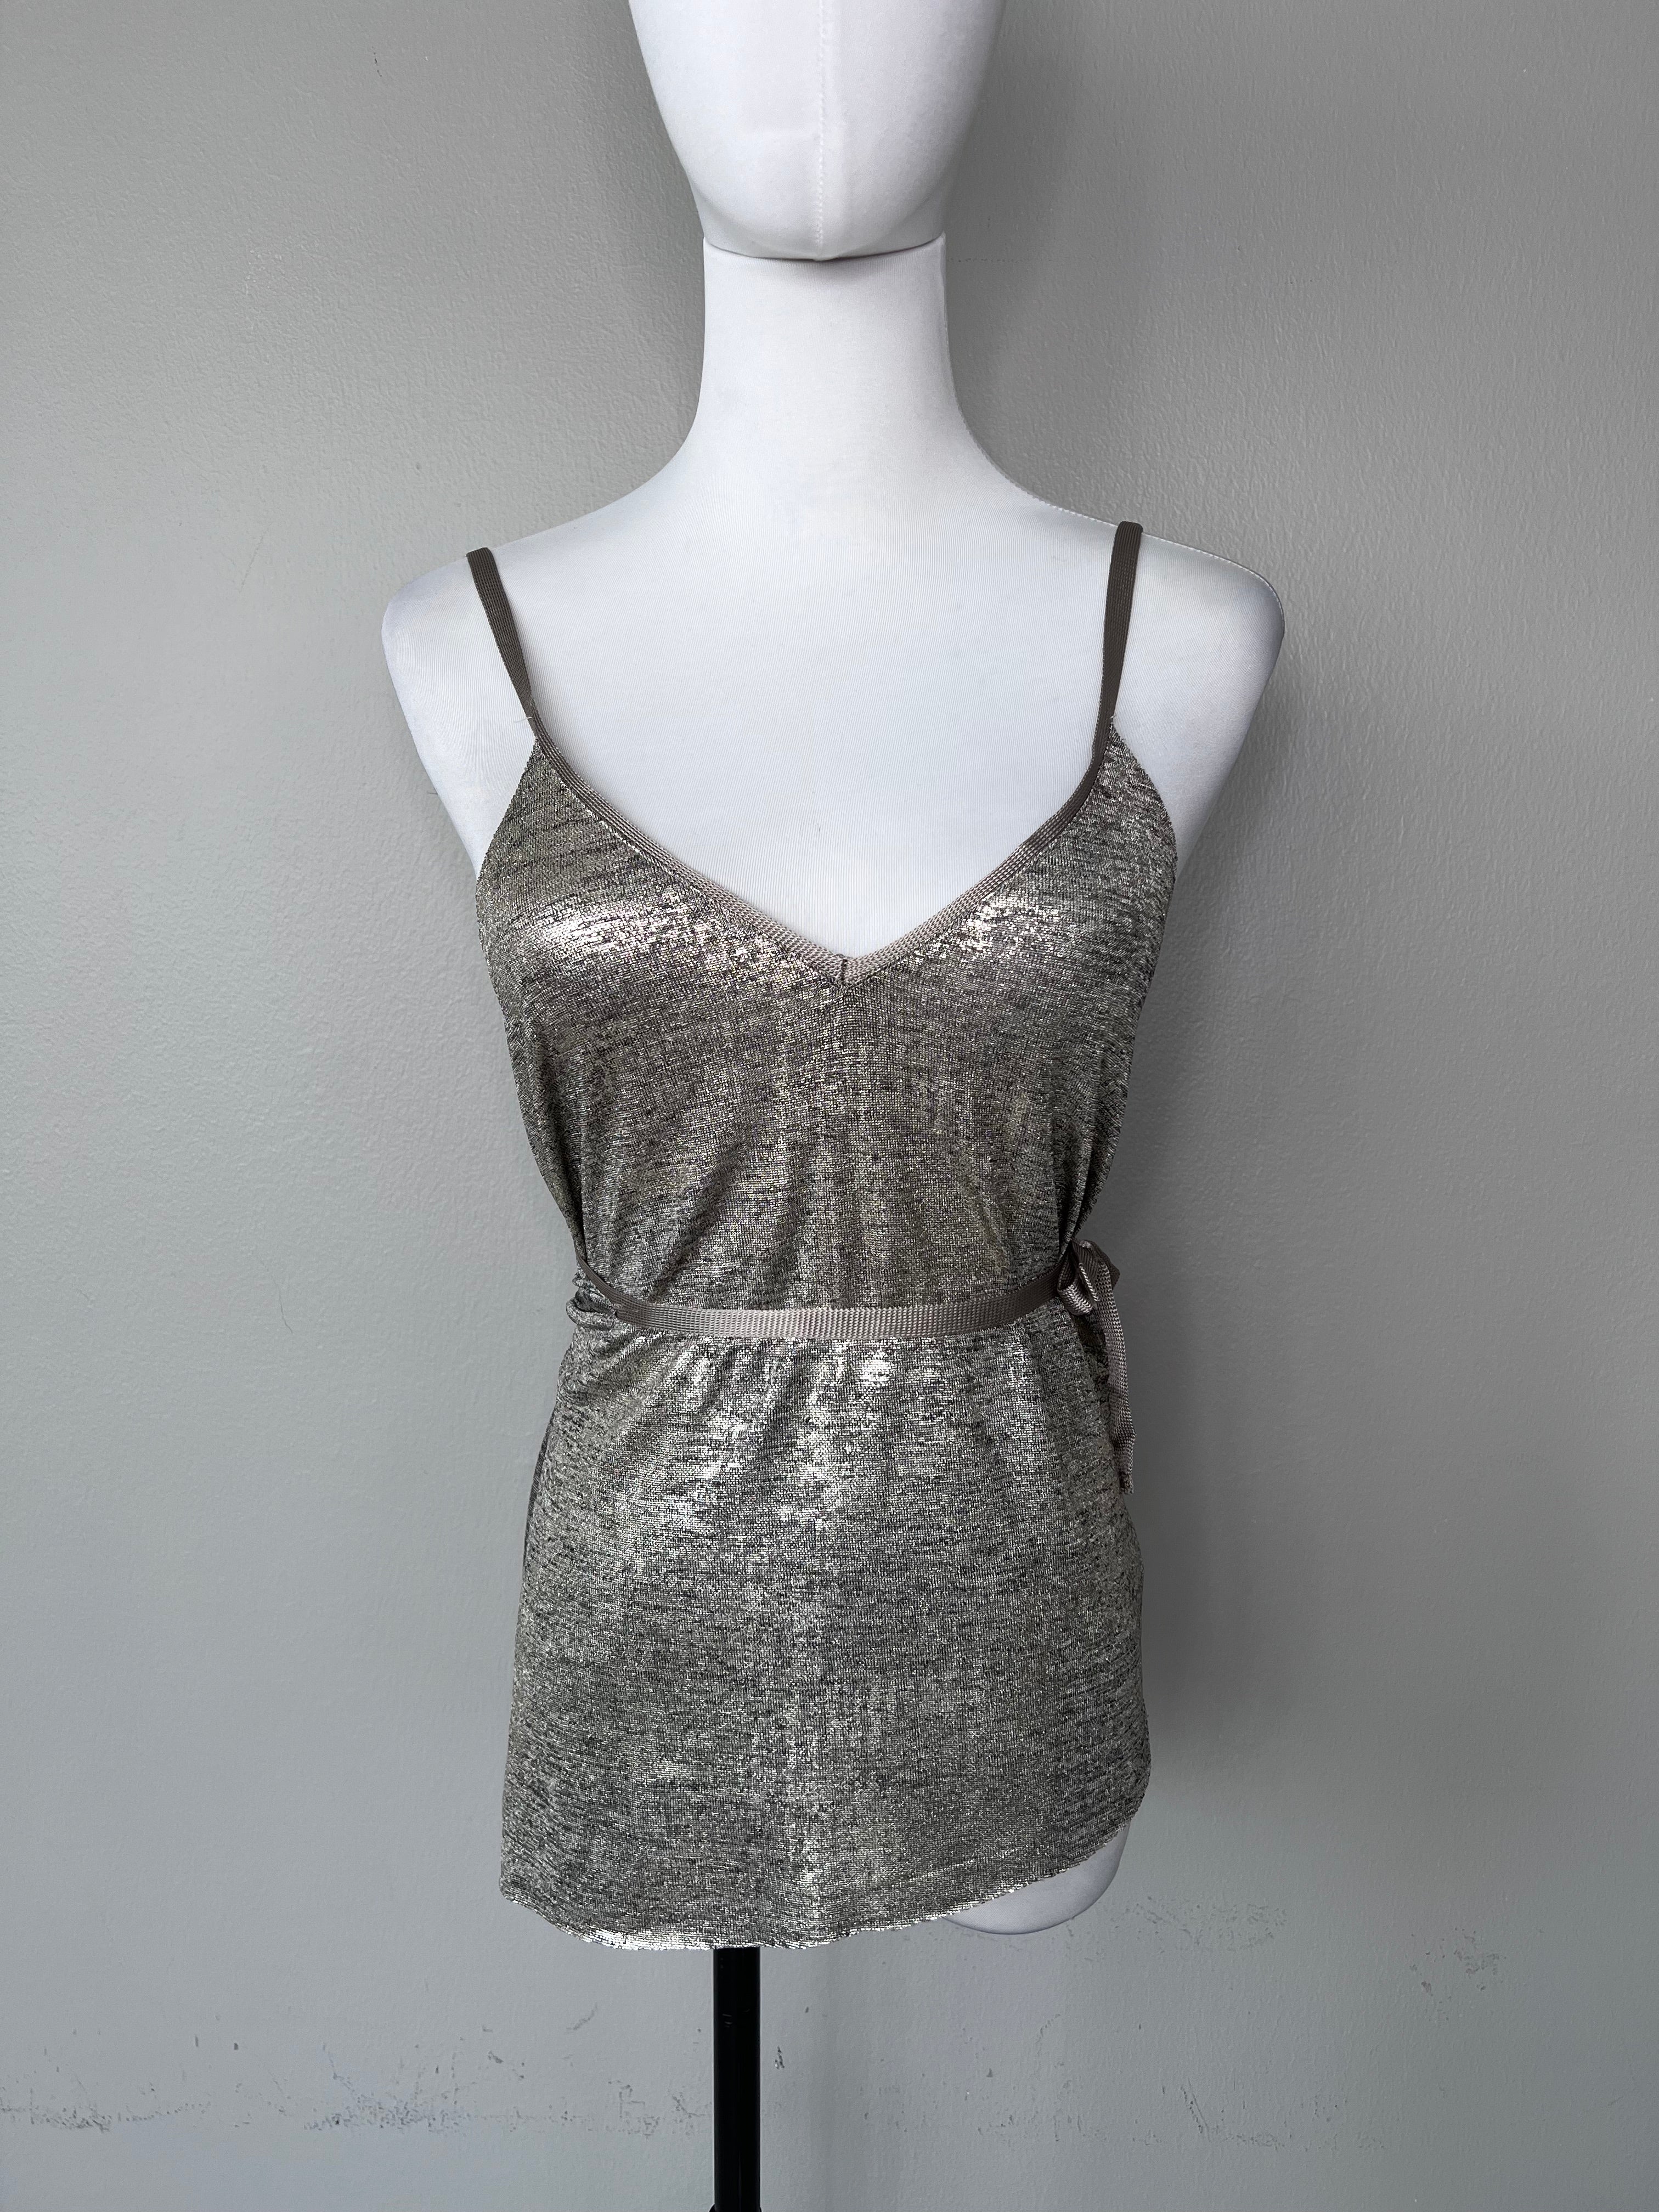 Silver Zara spaghetti strap top with reflective material, deep v neck and has tie up detailing in the back. - ZARA